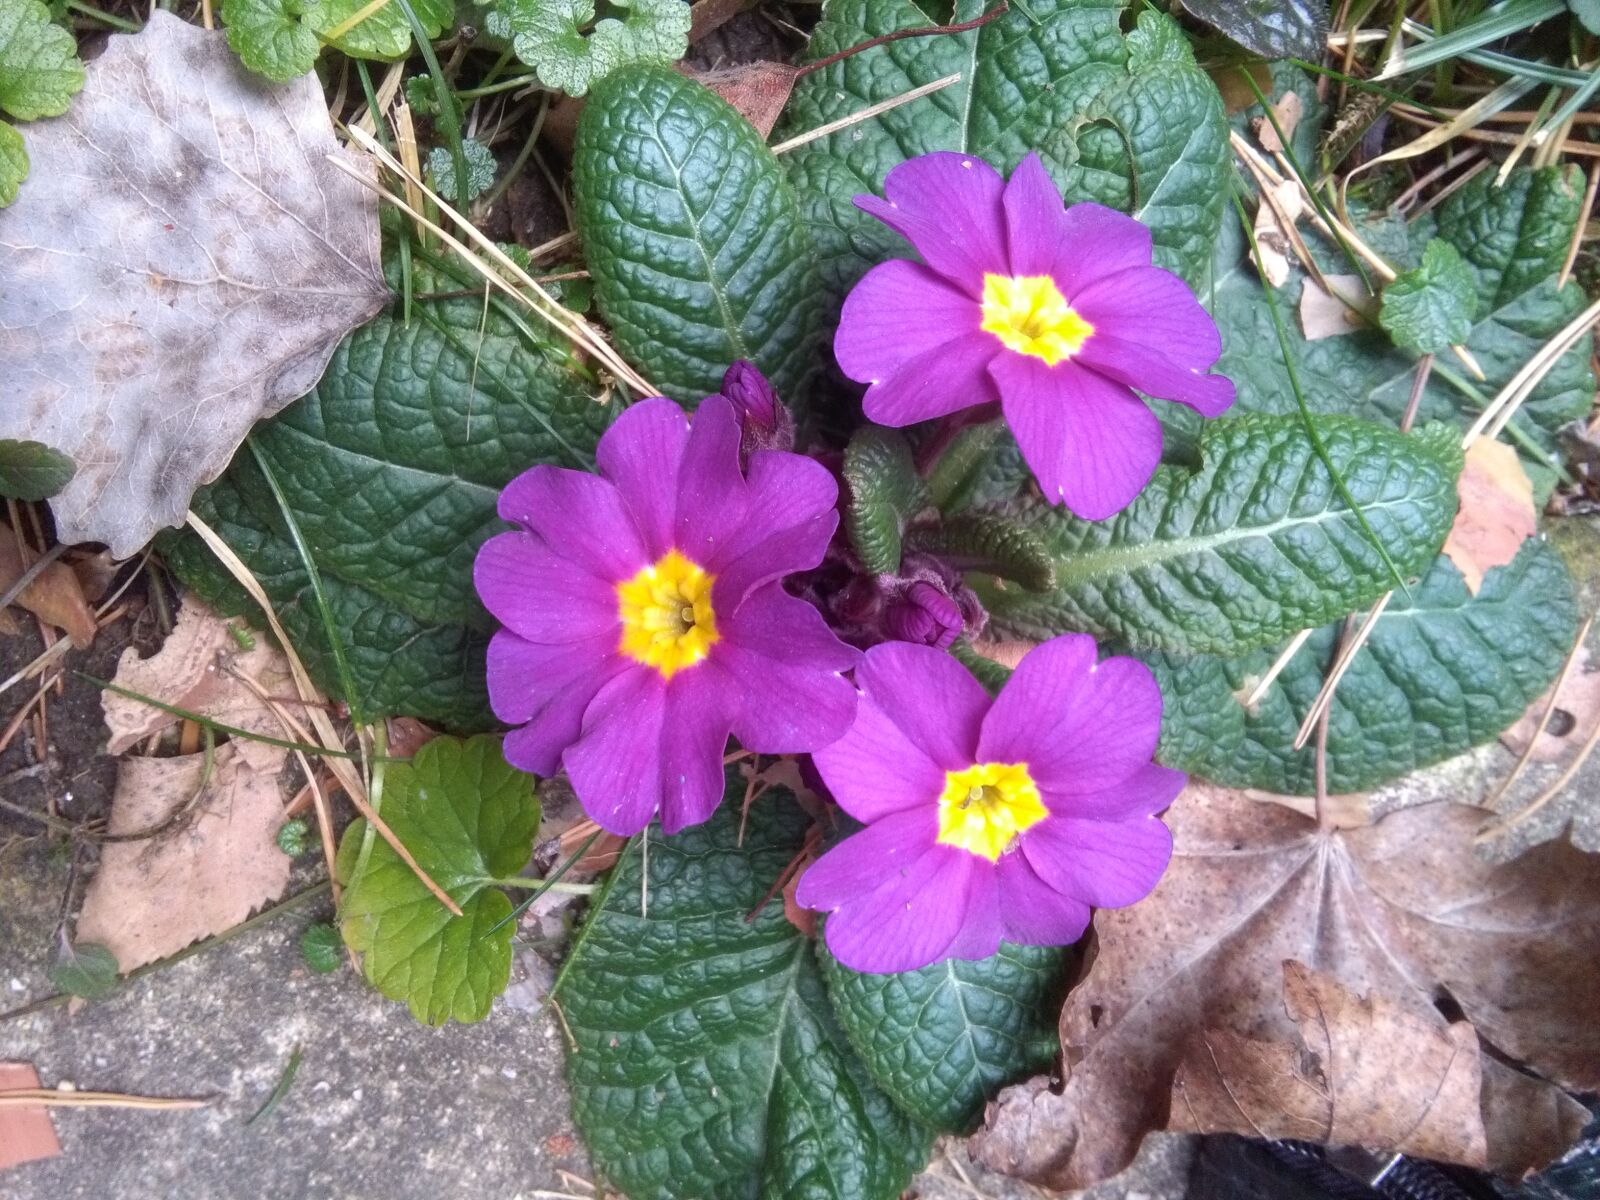 HUAWEI Y6 sample photo. Primroses, plant, nature photography